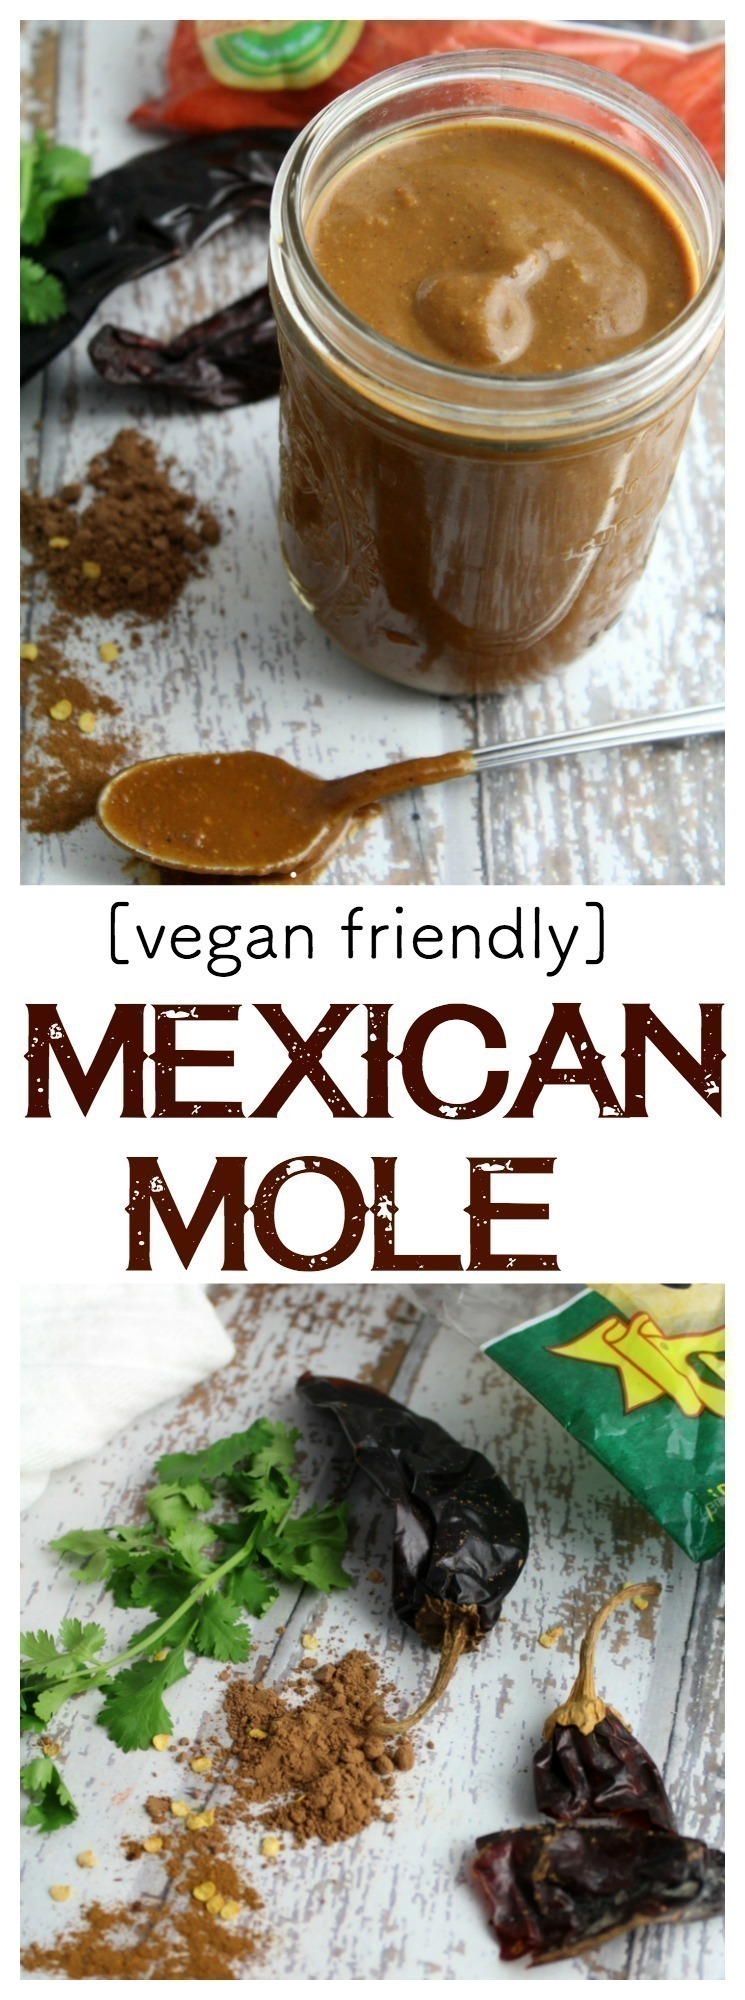 A rich, fragrant mole sauce that is wonderful on meatless enchiladas, tamales, and smothered on chicken. This sauce is vegan friendly and freezes wonderfully!    #vegan #meatless 